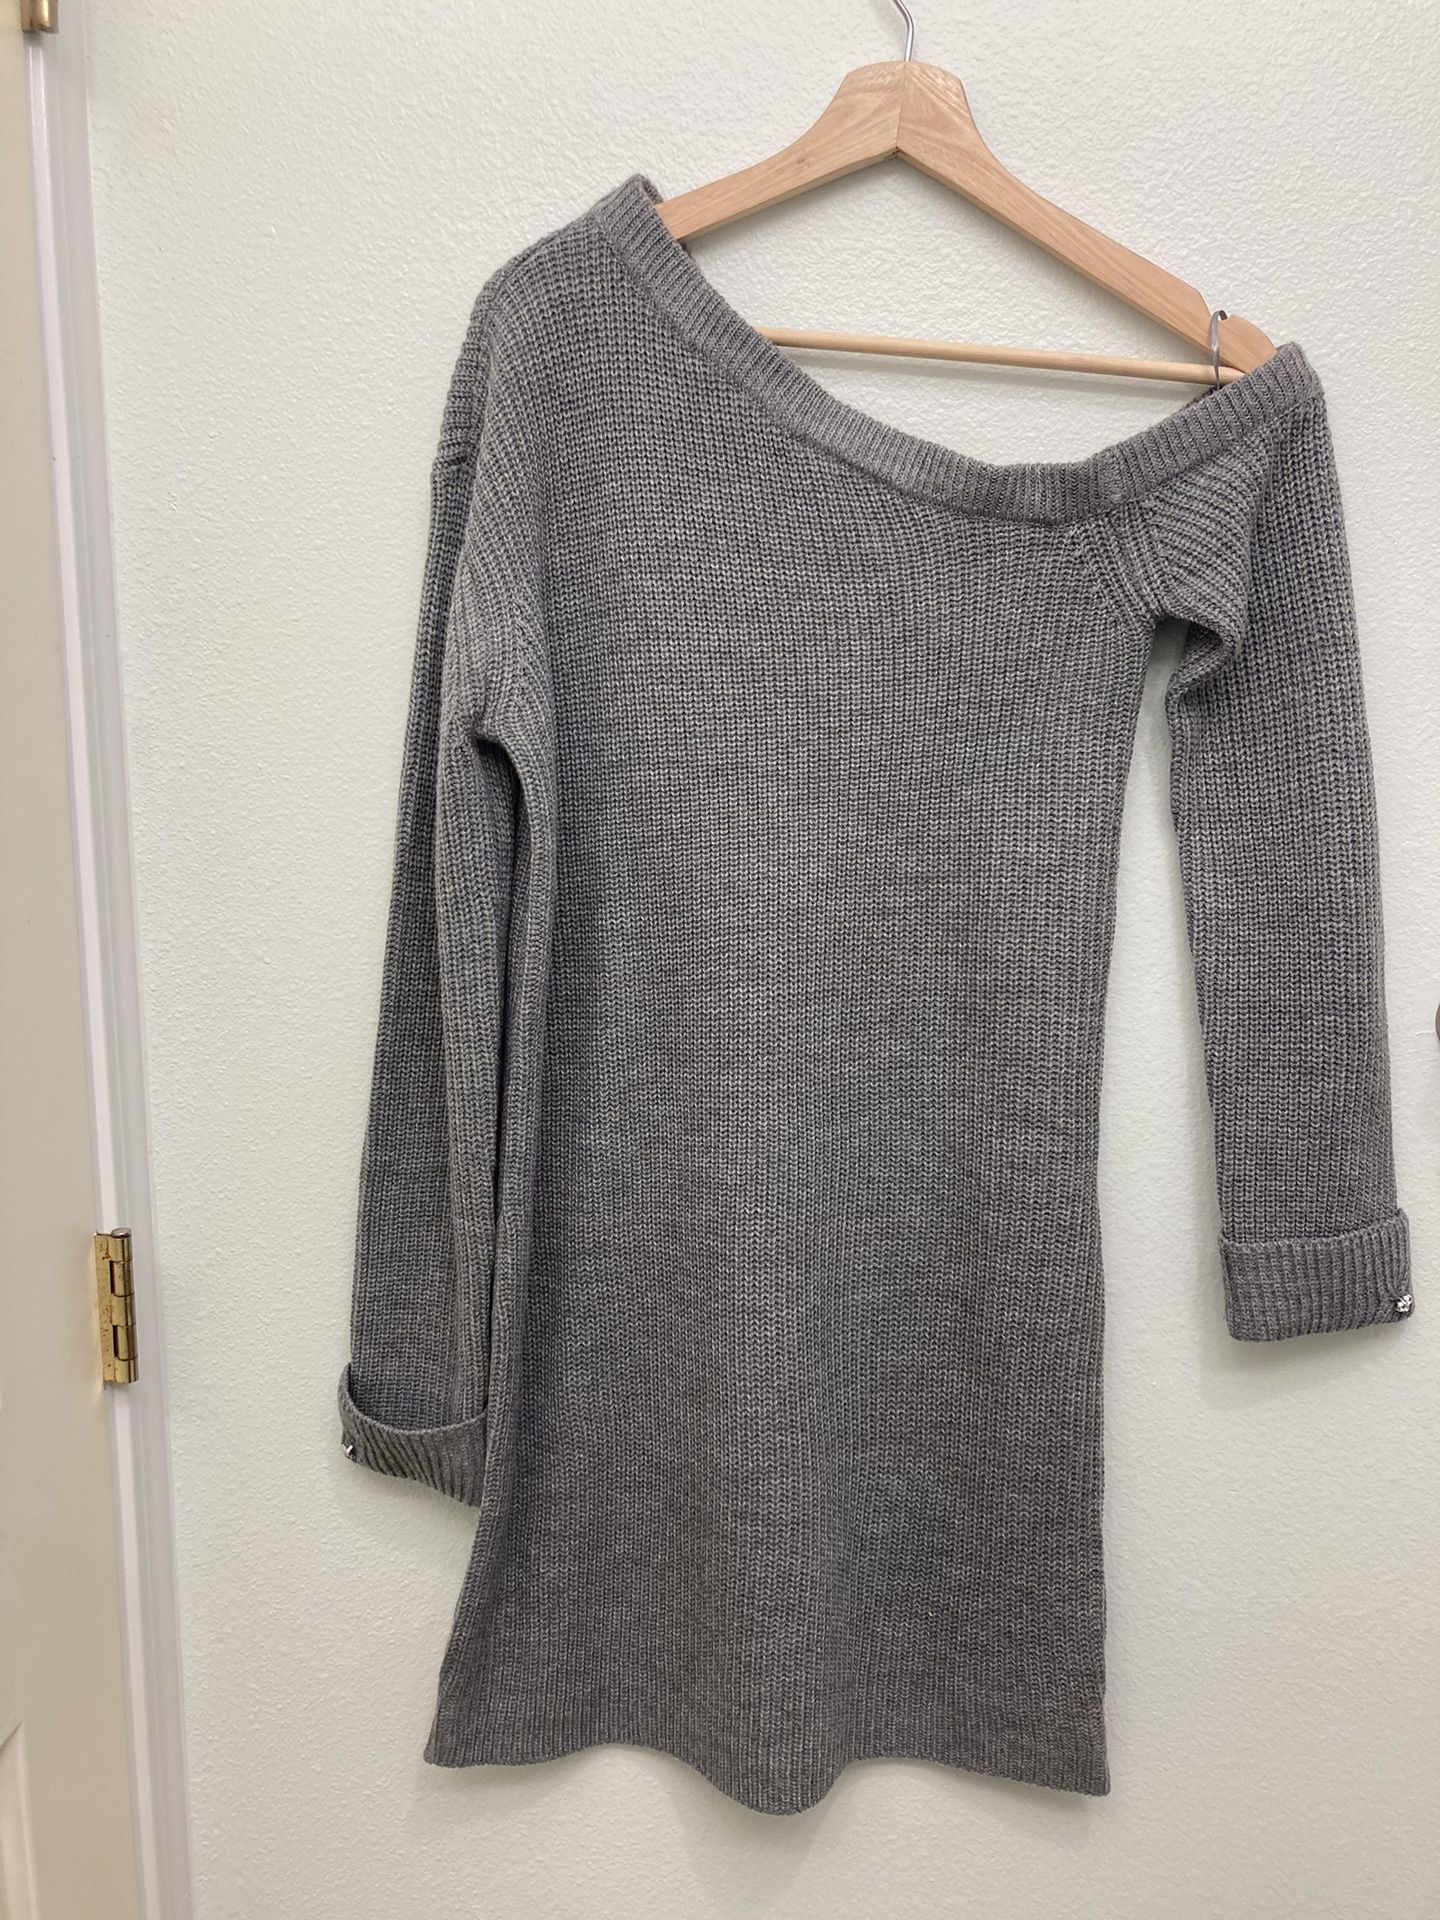 Off The Shoulder Sweater Dress, Grey, Size M